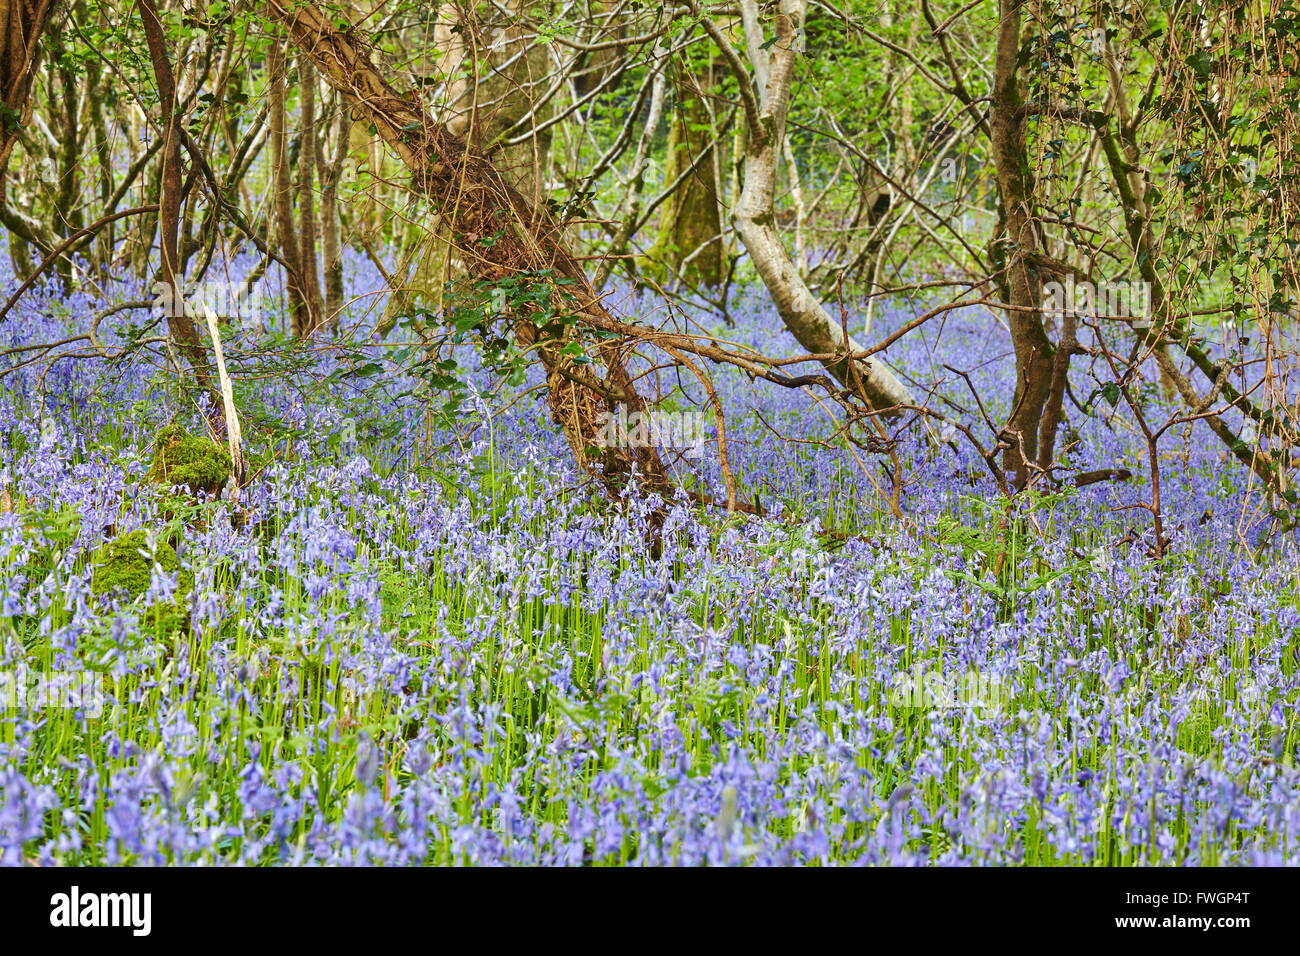 Bluebells in flower in Lady's Wood, near South Brent, Devon, England, United Kingdom, Europe Stock Photo